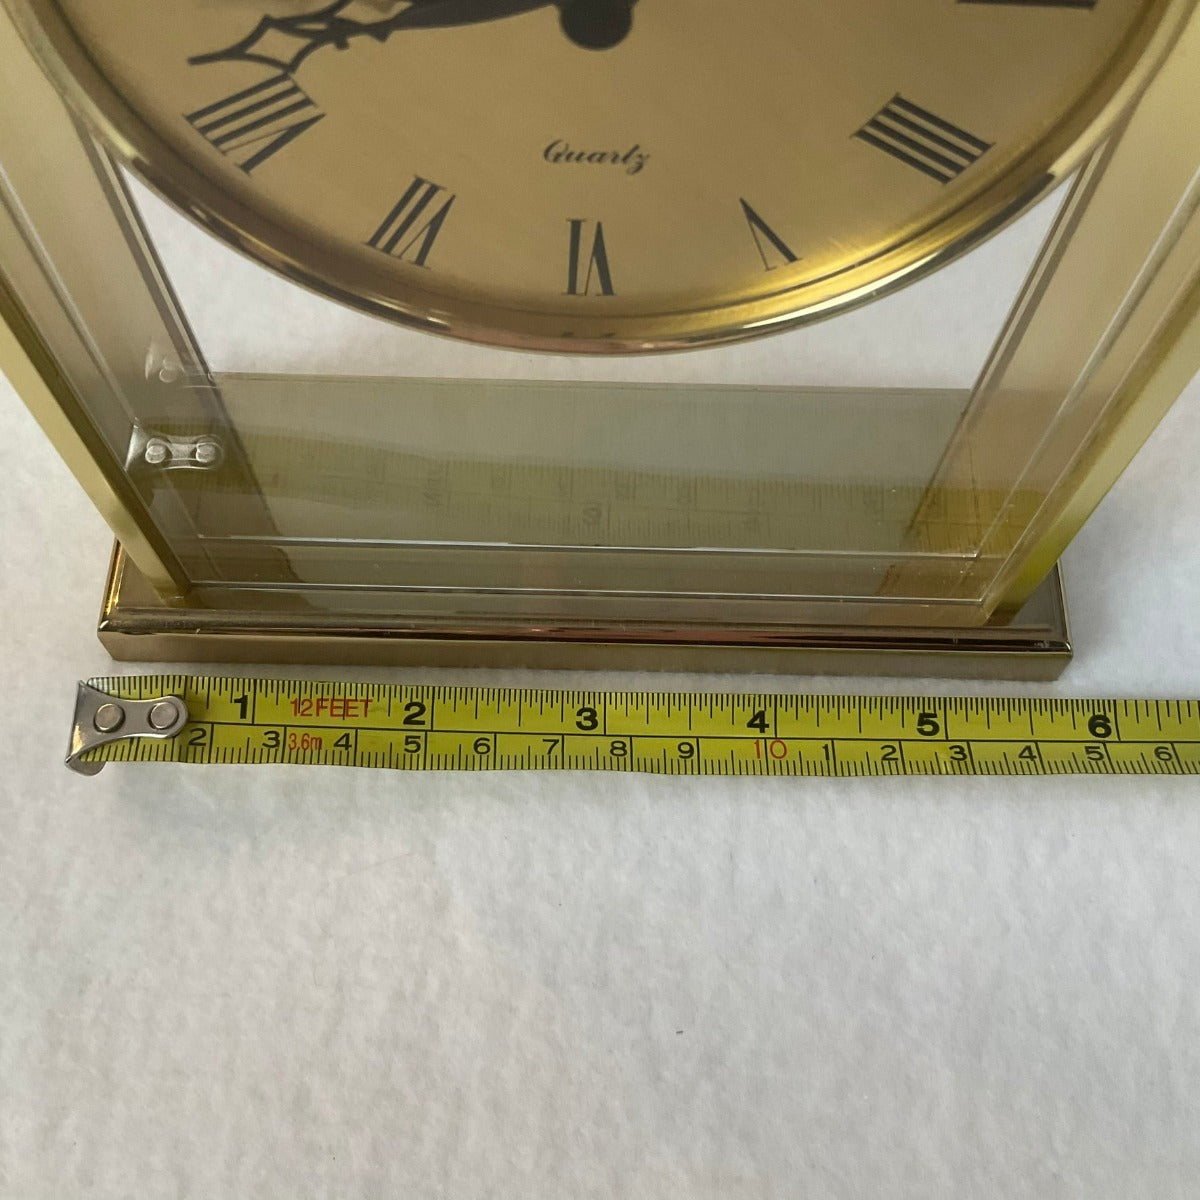 Equity Clock Quartz Vintage Analog Table Mantle Clock in Brass - 6 inches at base